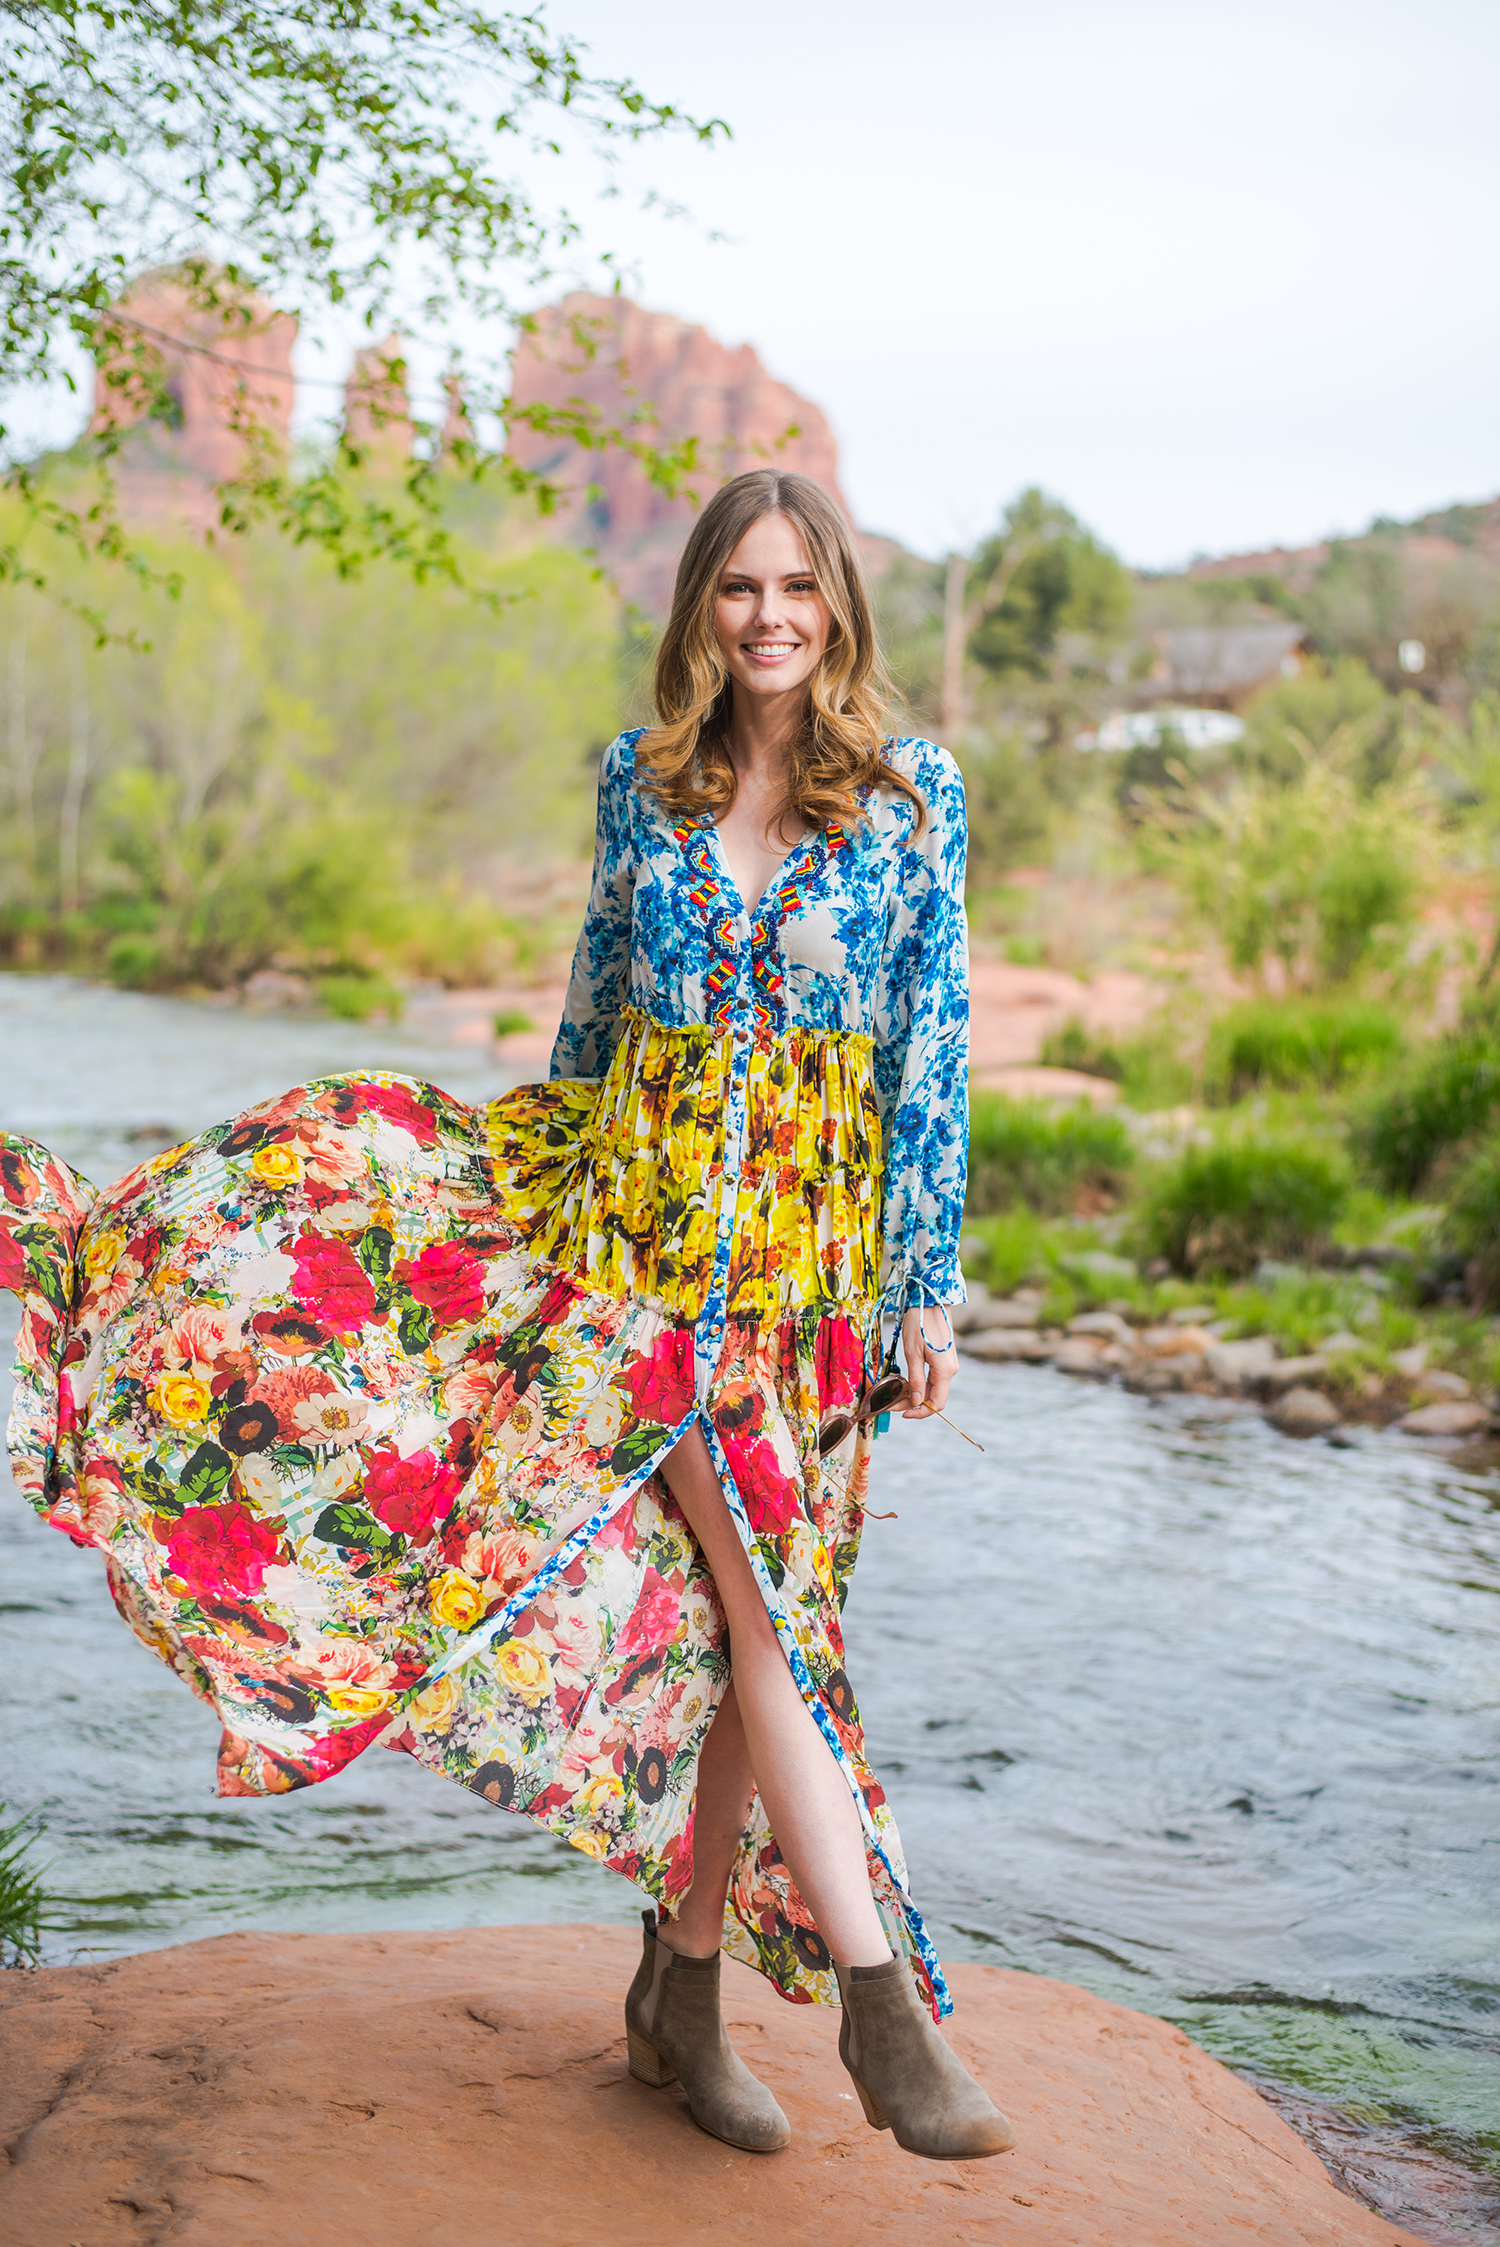 Miss USA 2011 Alyssa Campanella of The A List blog visits Cathedral Rock at Red Rock Crossing in Sedona wearing Rococo Sand Romantic Floral Maxi dress